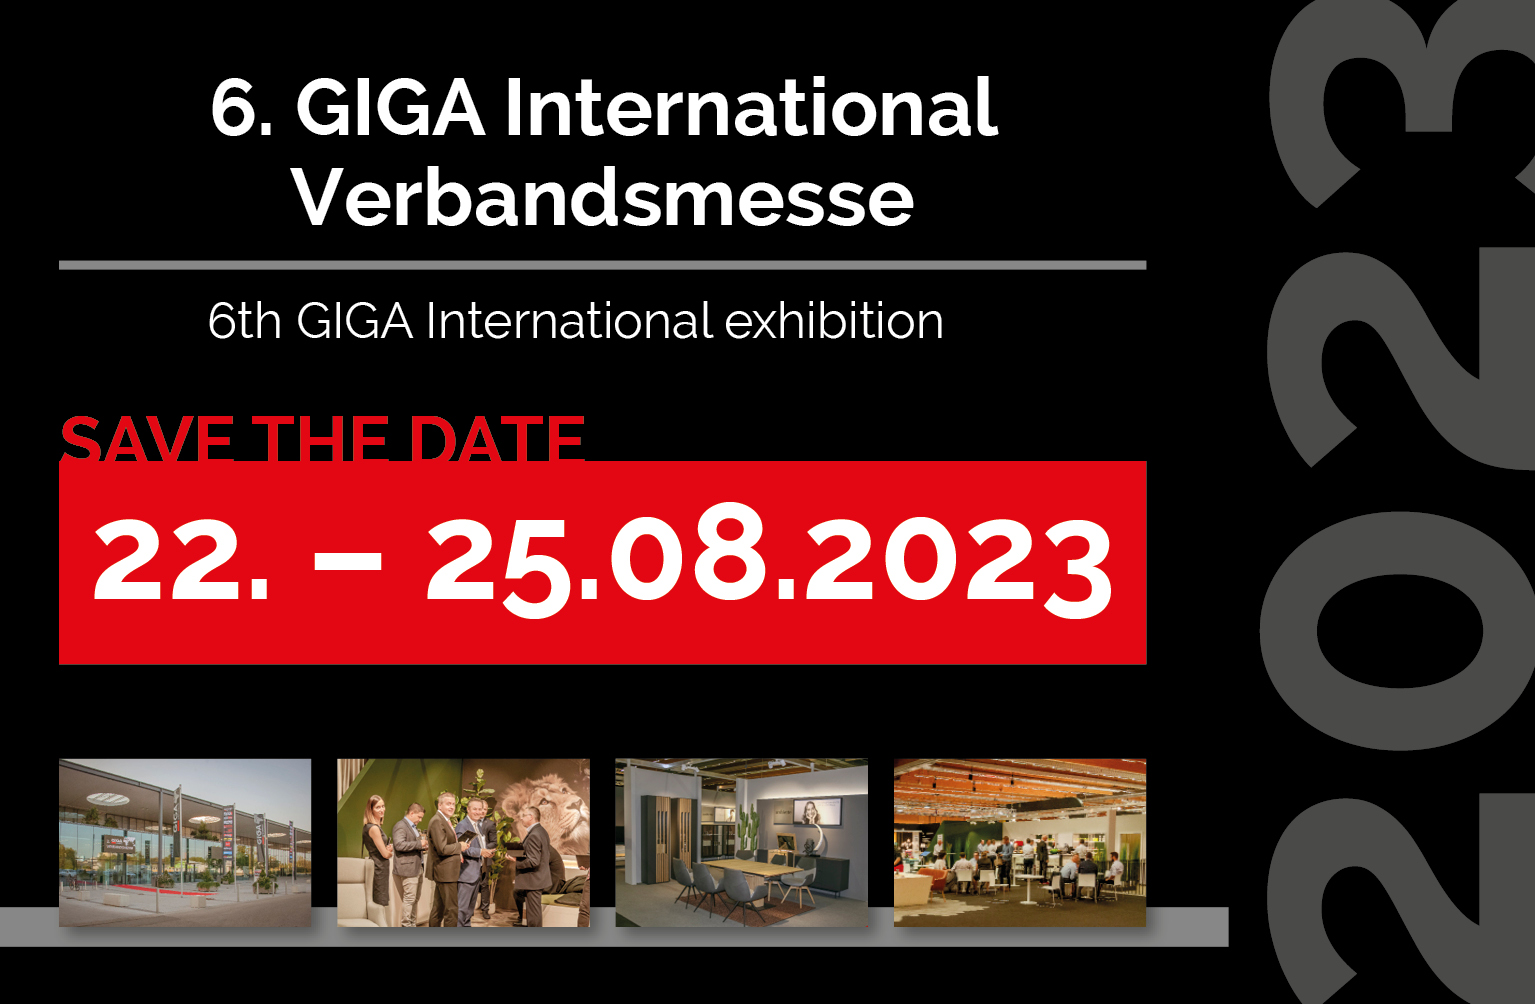 Save the date – 6TH GIGA international exhibition in wels